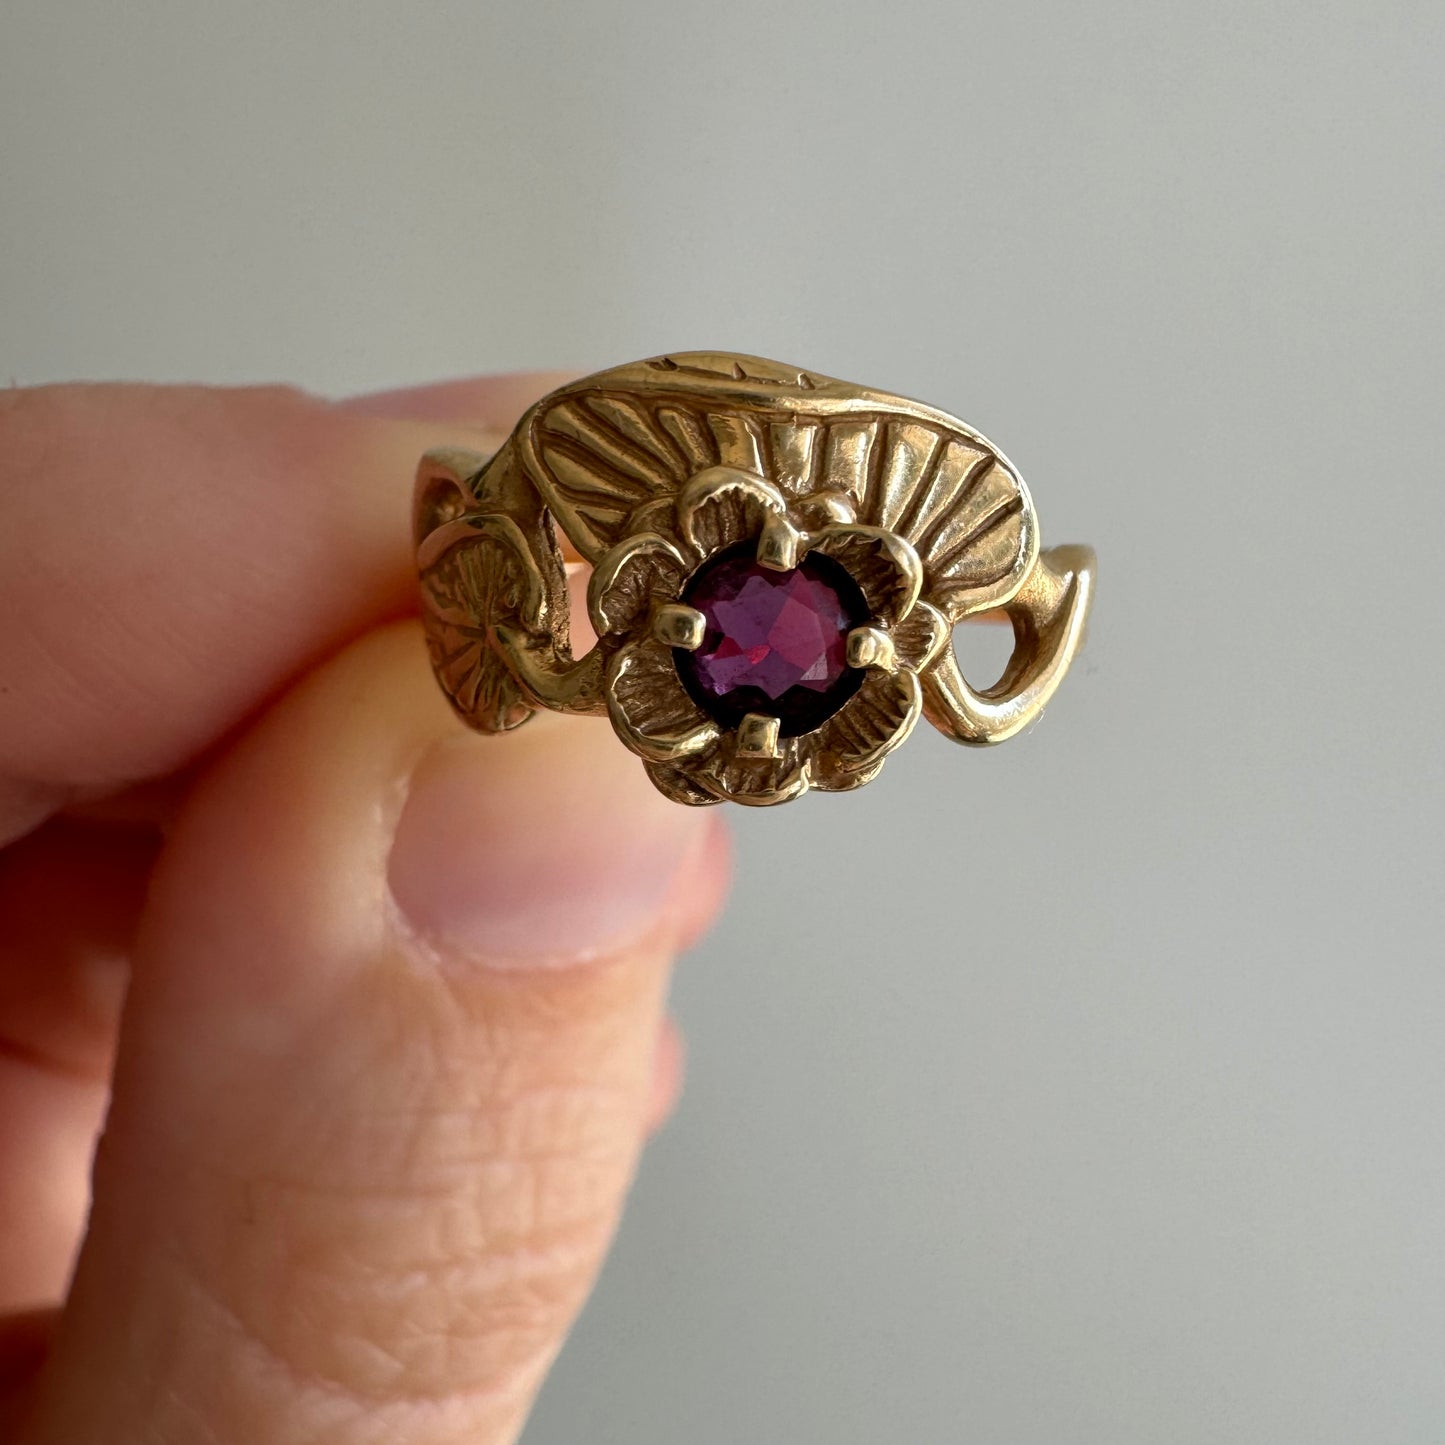 V I N T A G E // like a waterlily / 14k and rhodolite garnet floral ring / size 5.5